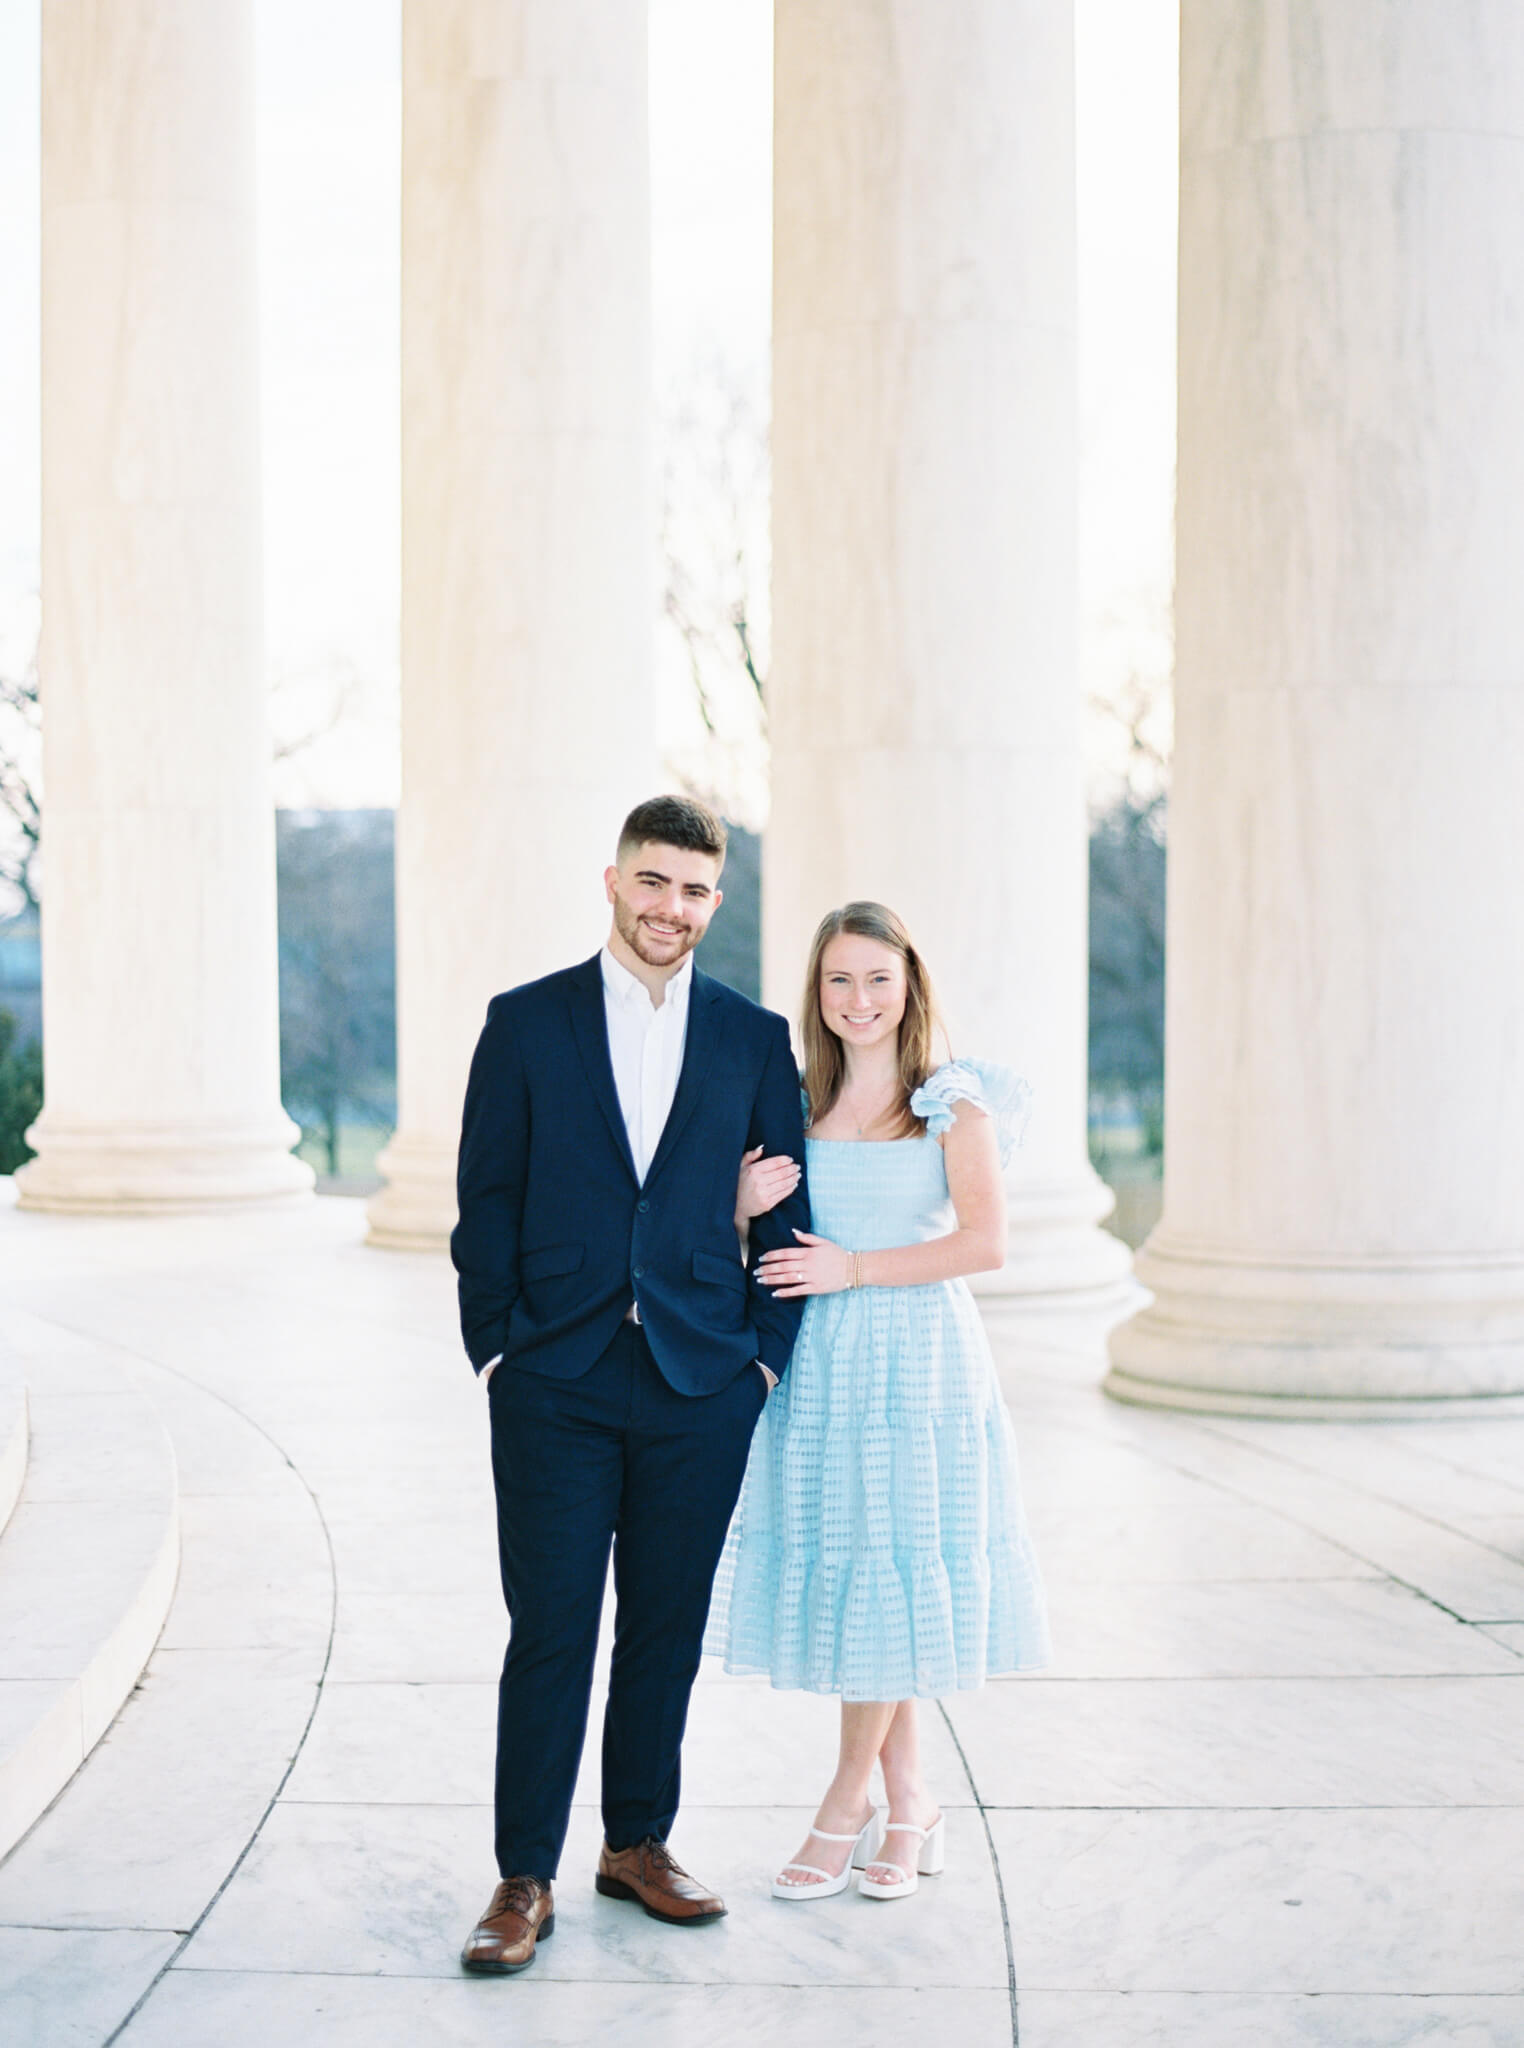 A young man and woman wearing formal attire standing in front of the marble columns during their Jefferson Memorial Engagement Photos